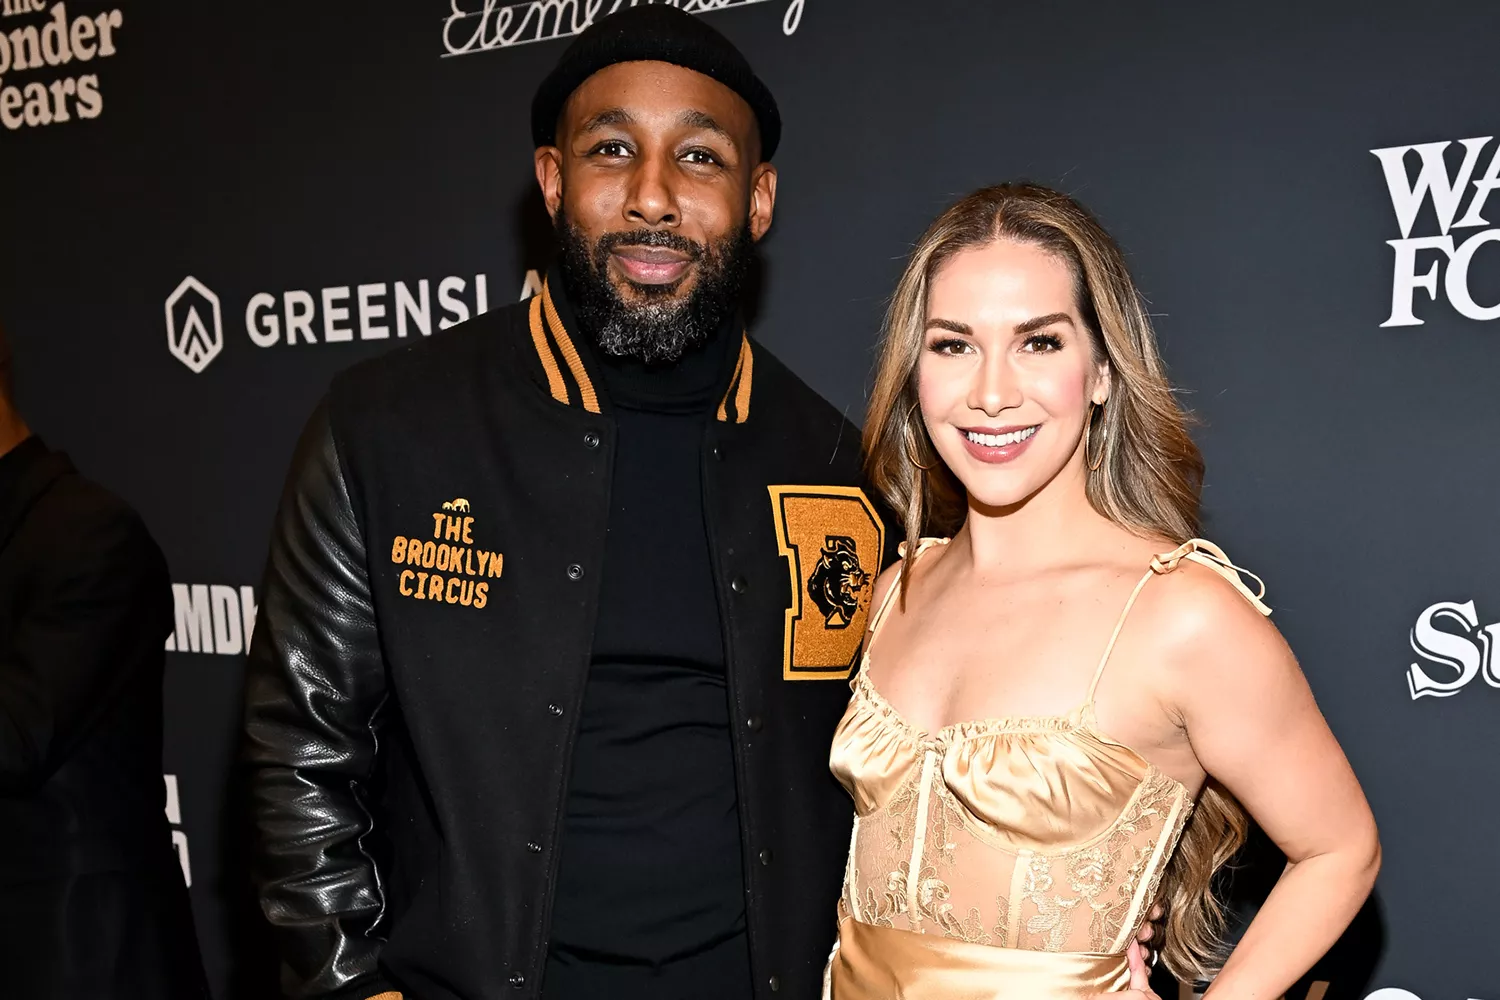 Stephen 'tWitch' Boss's company and future earnings were divided equally between Allison Holker Boss and her late husband.

